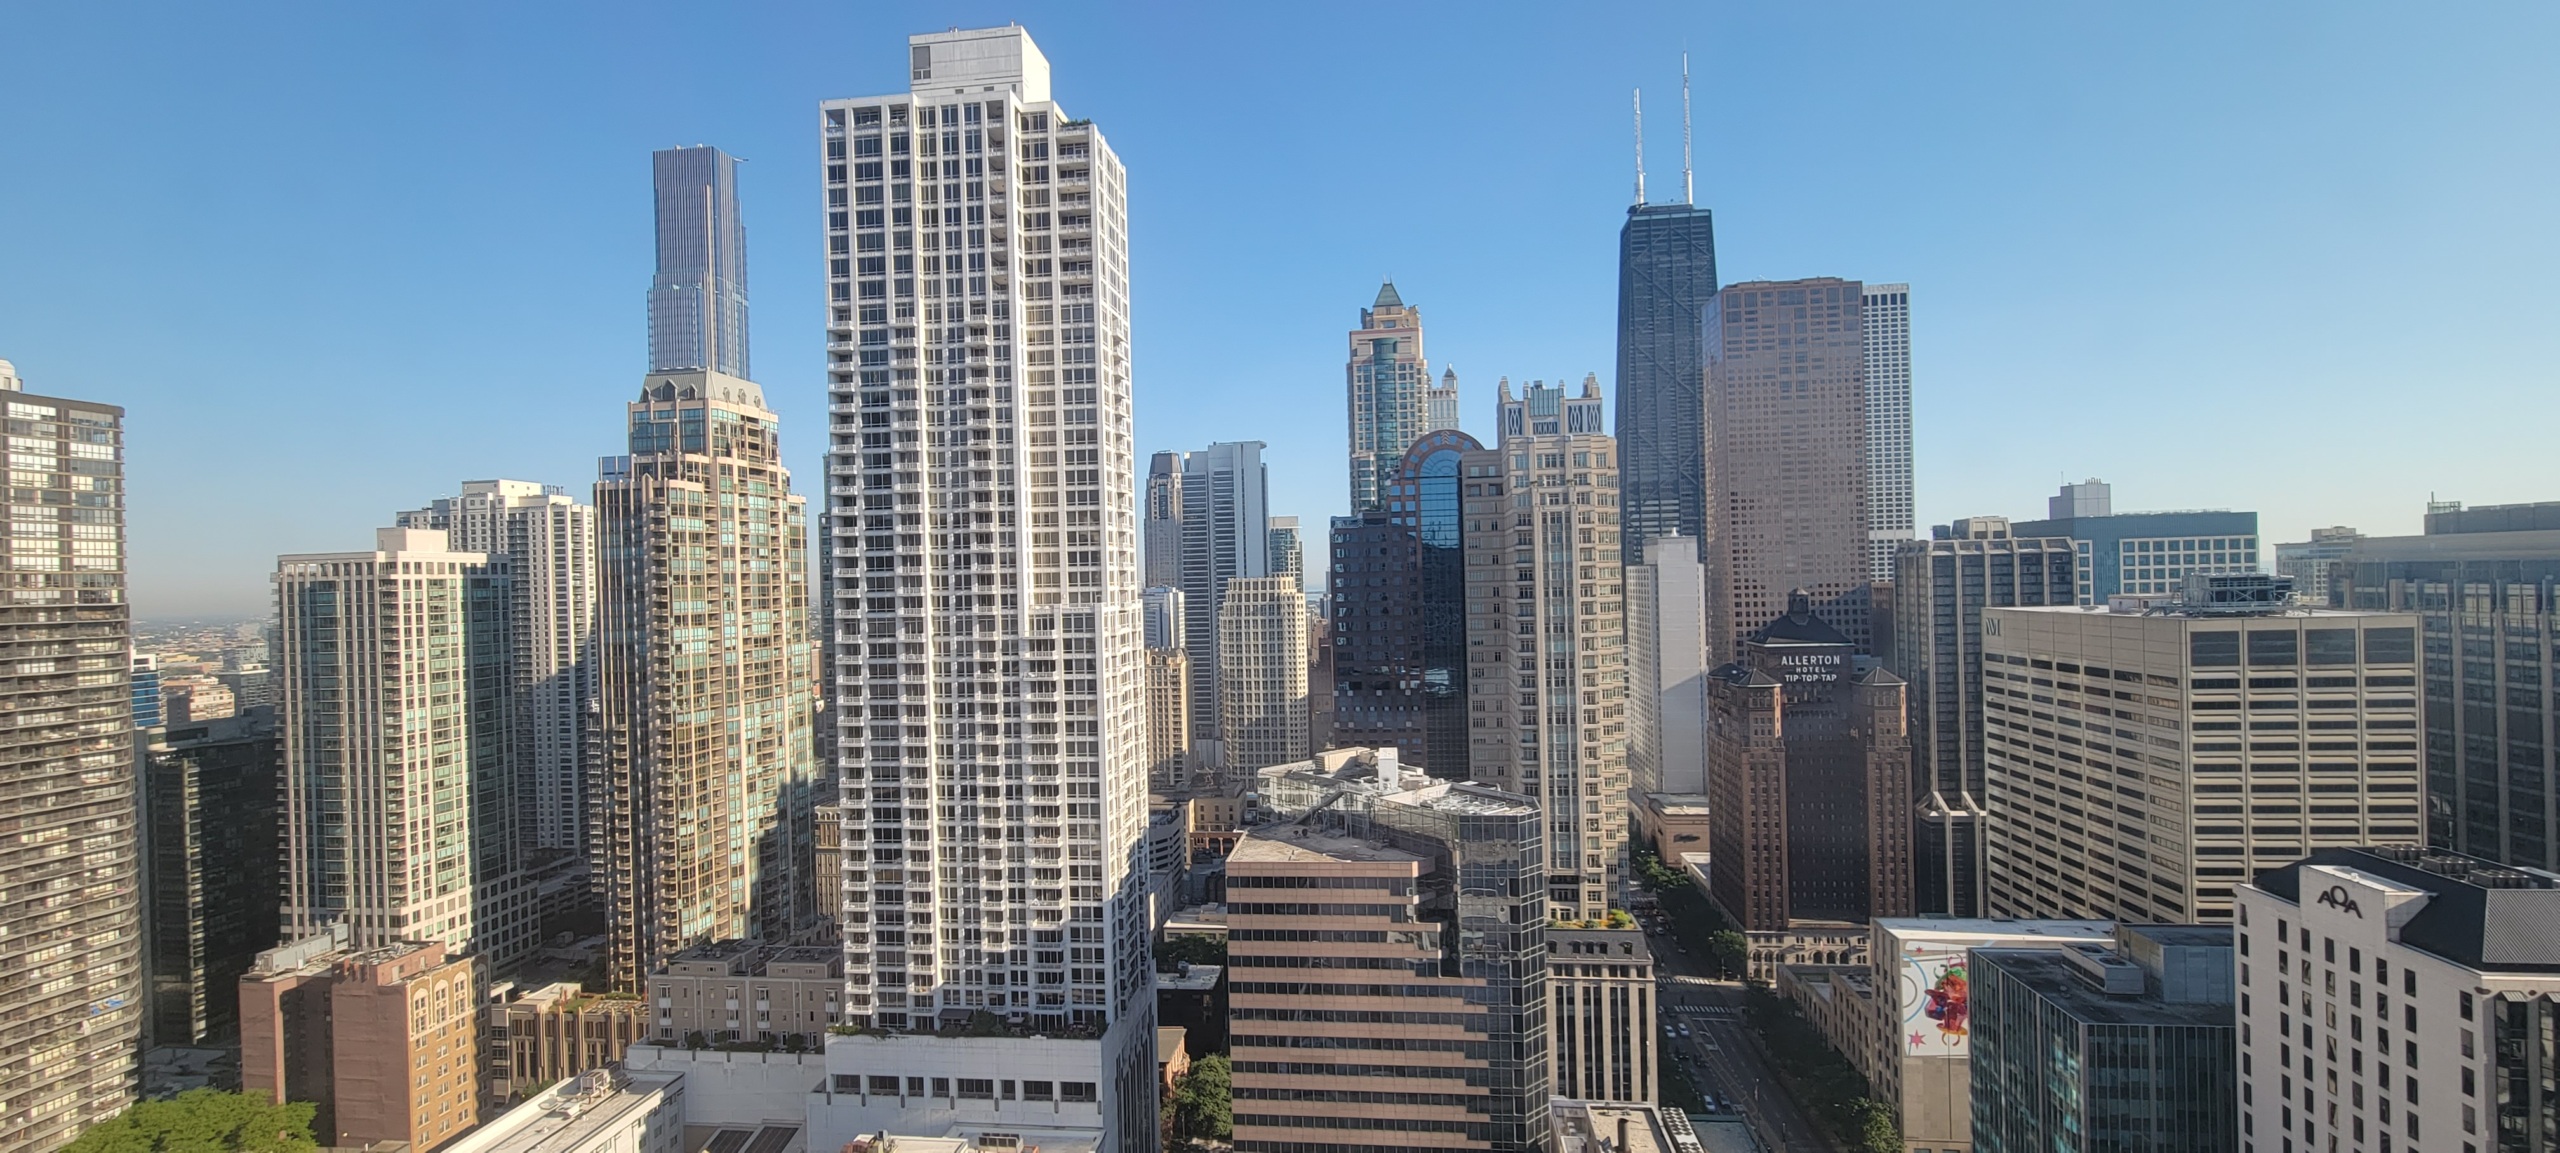 Photo of Chicago's skyline, facing north from the 38th floor of the Chicago Marriott Downtown, with several skyscrapers including the landmark Hancock Building